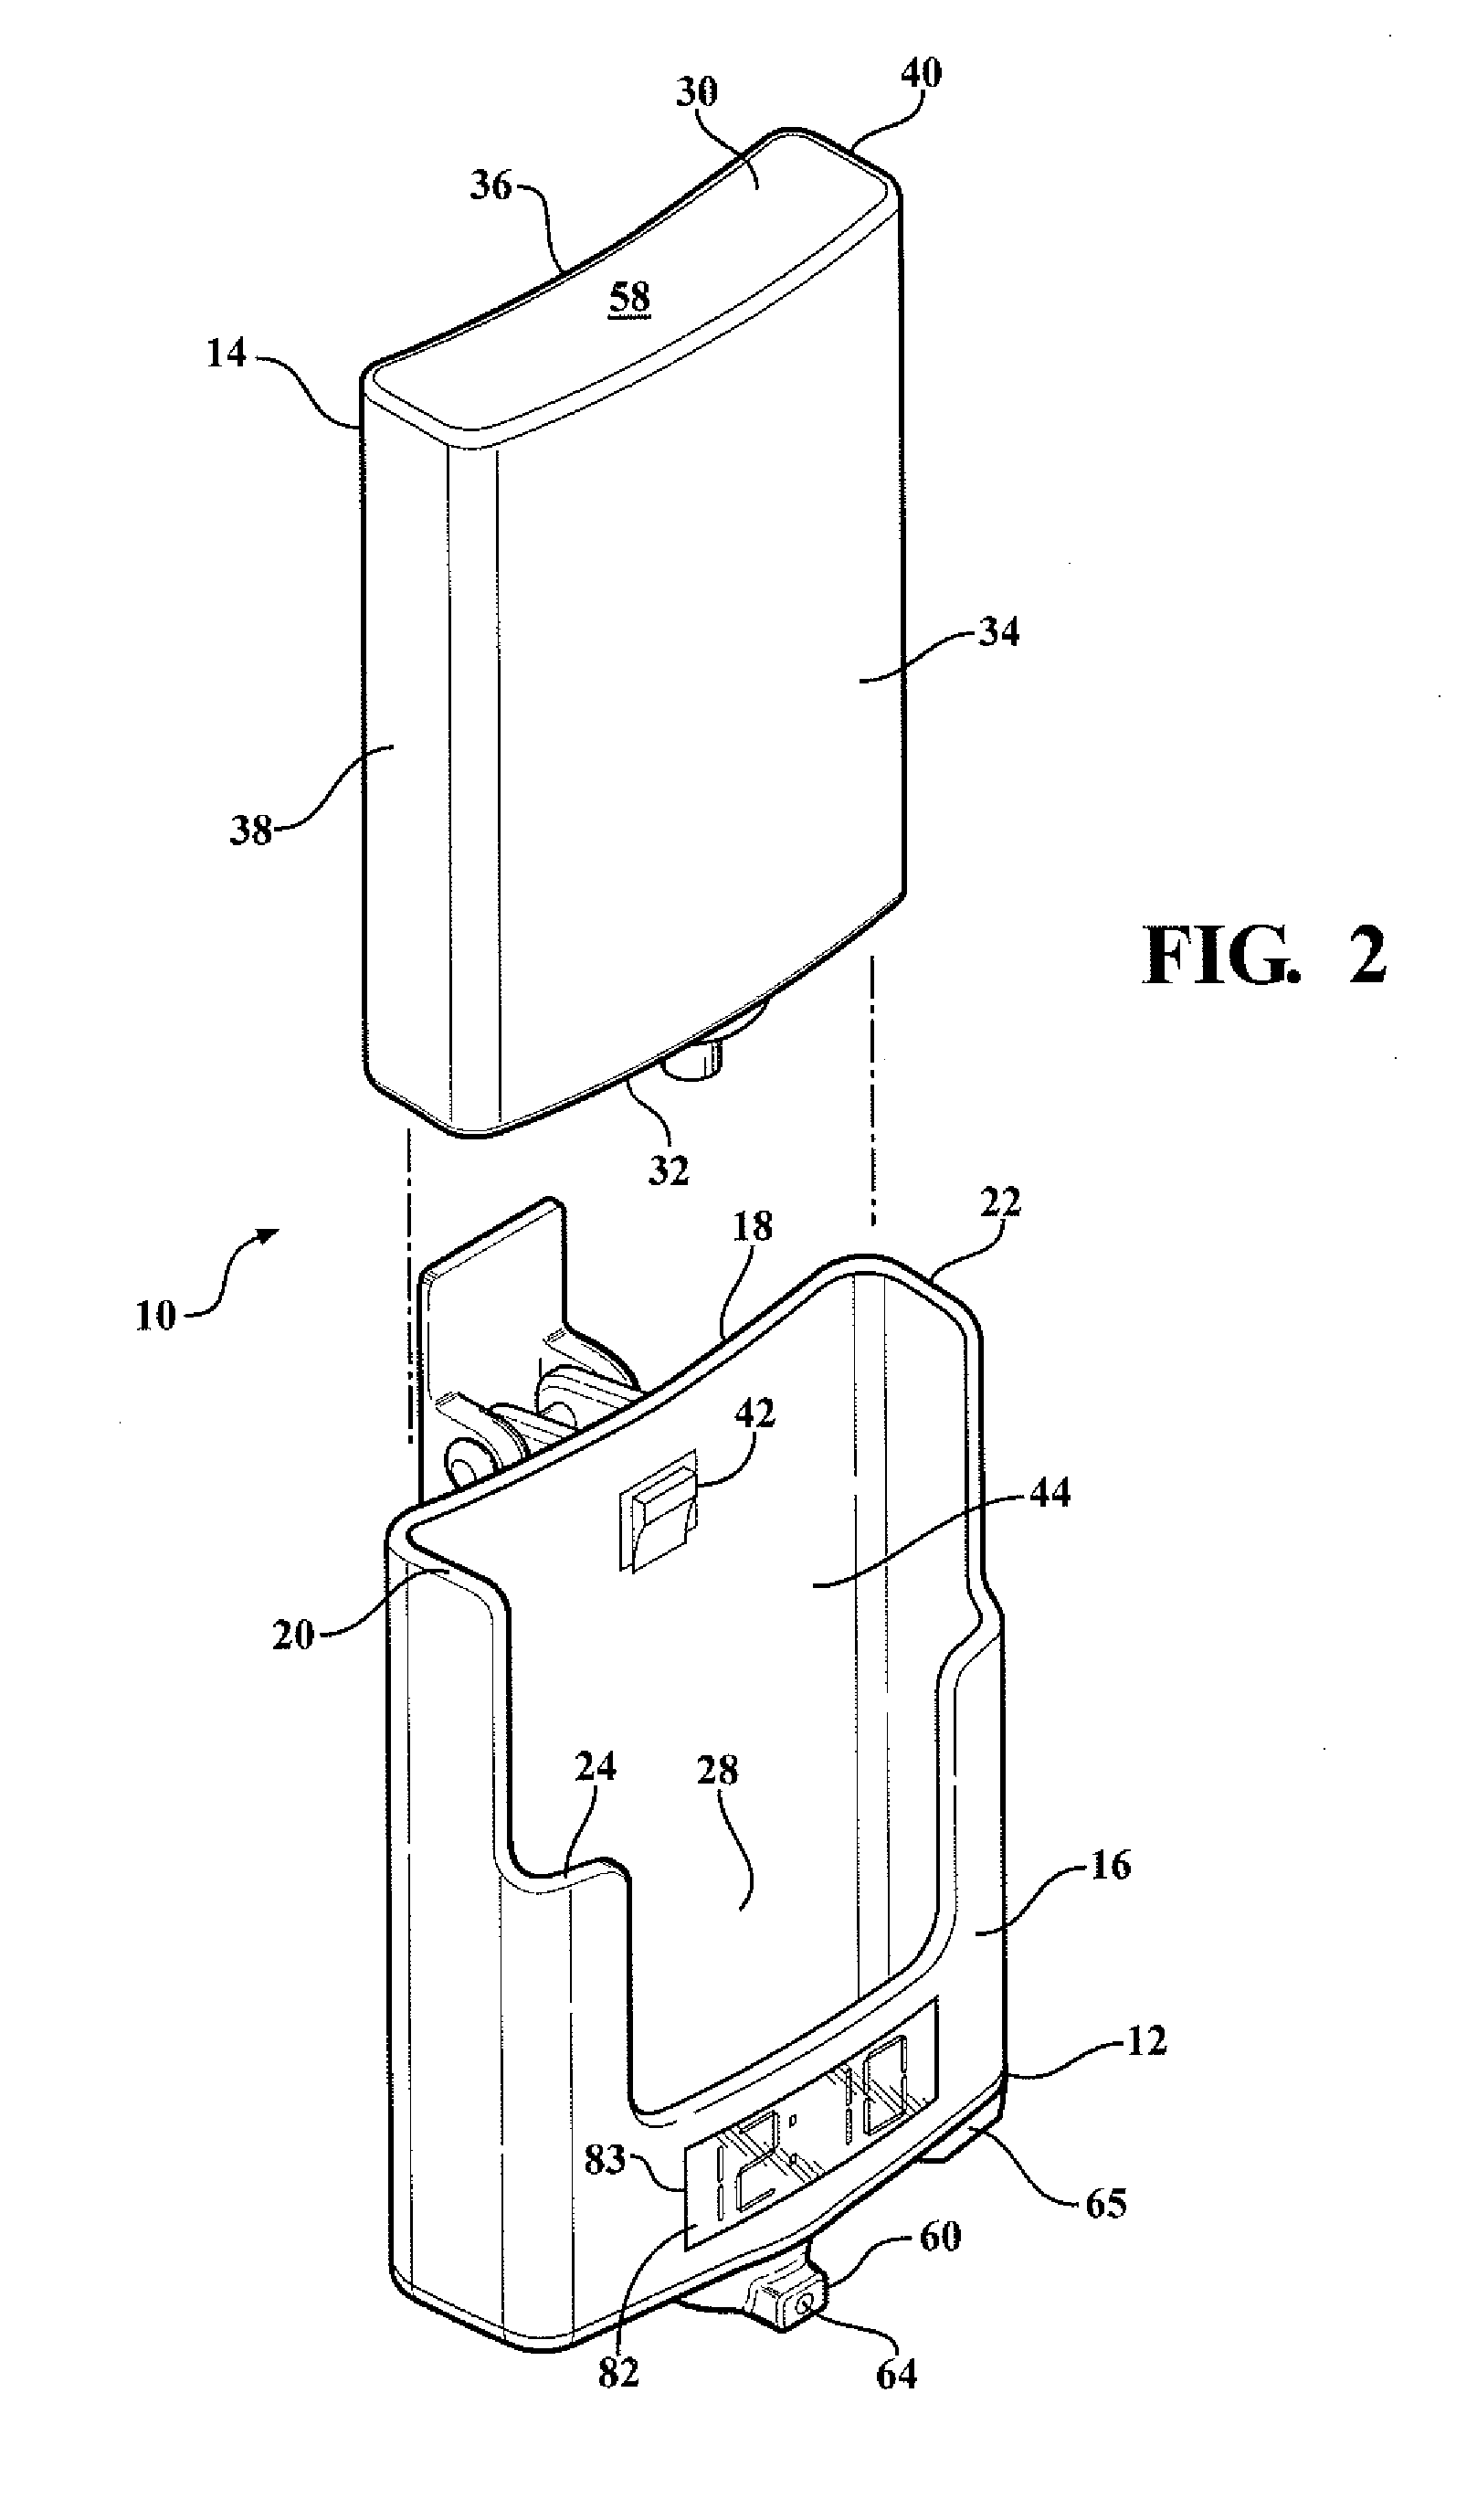 Dispenser Assembly For Dispensing Disinfectant Fluid And Method For Use Thereof And Data Collection And Monitoring System For Monitoring And Reporting Dispensing Events